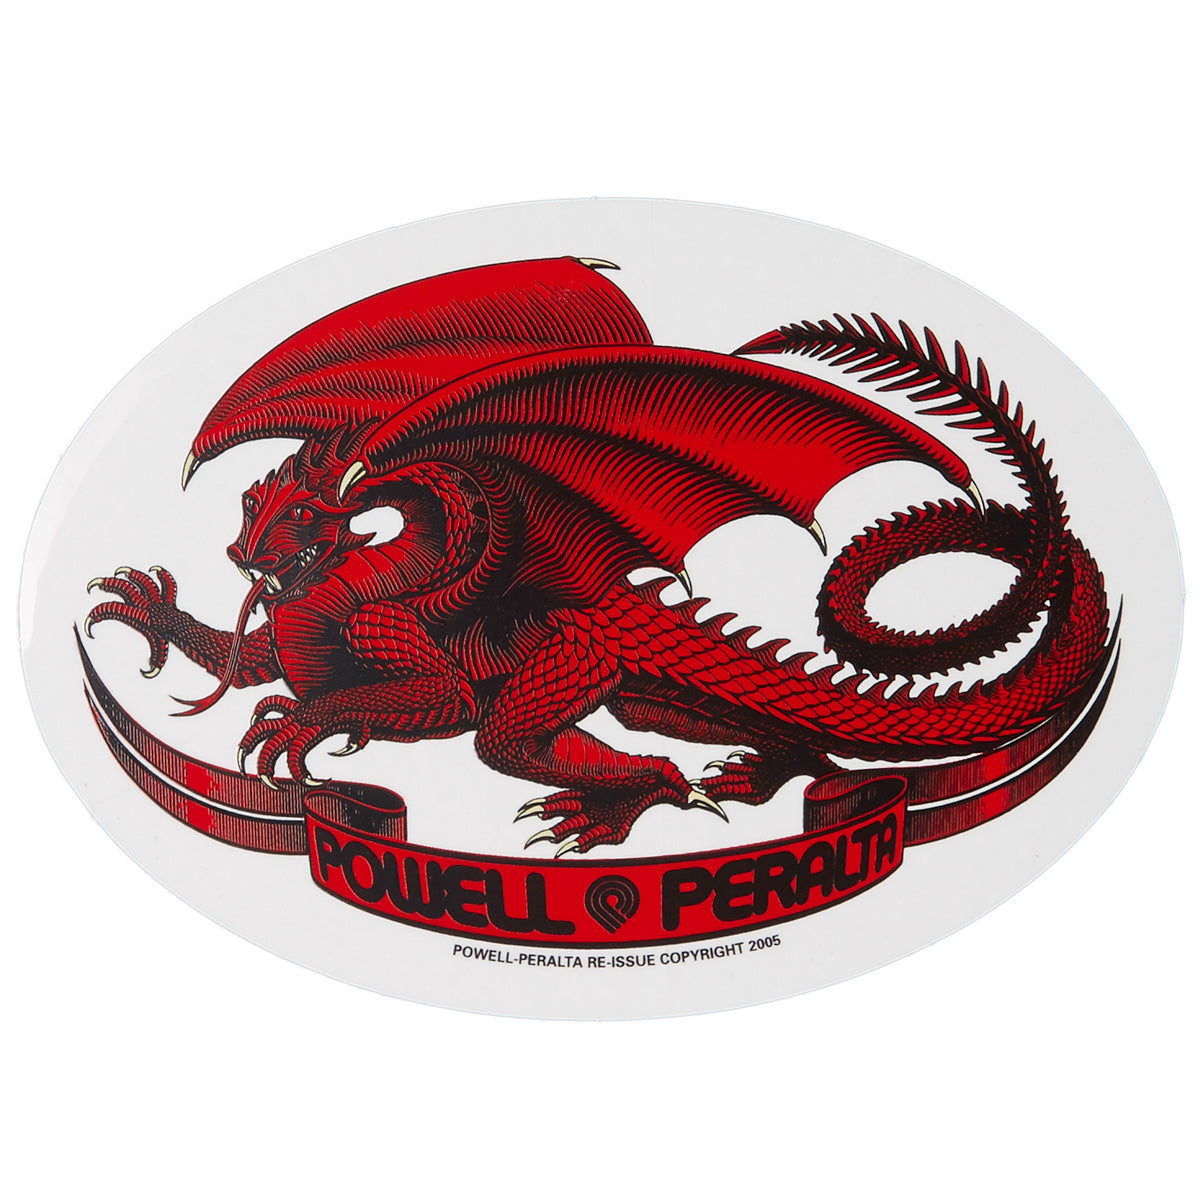 Powell Peralta Oval Dragon Stickers - 5